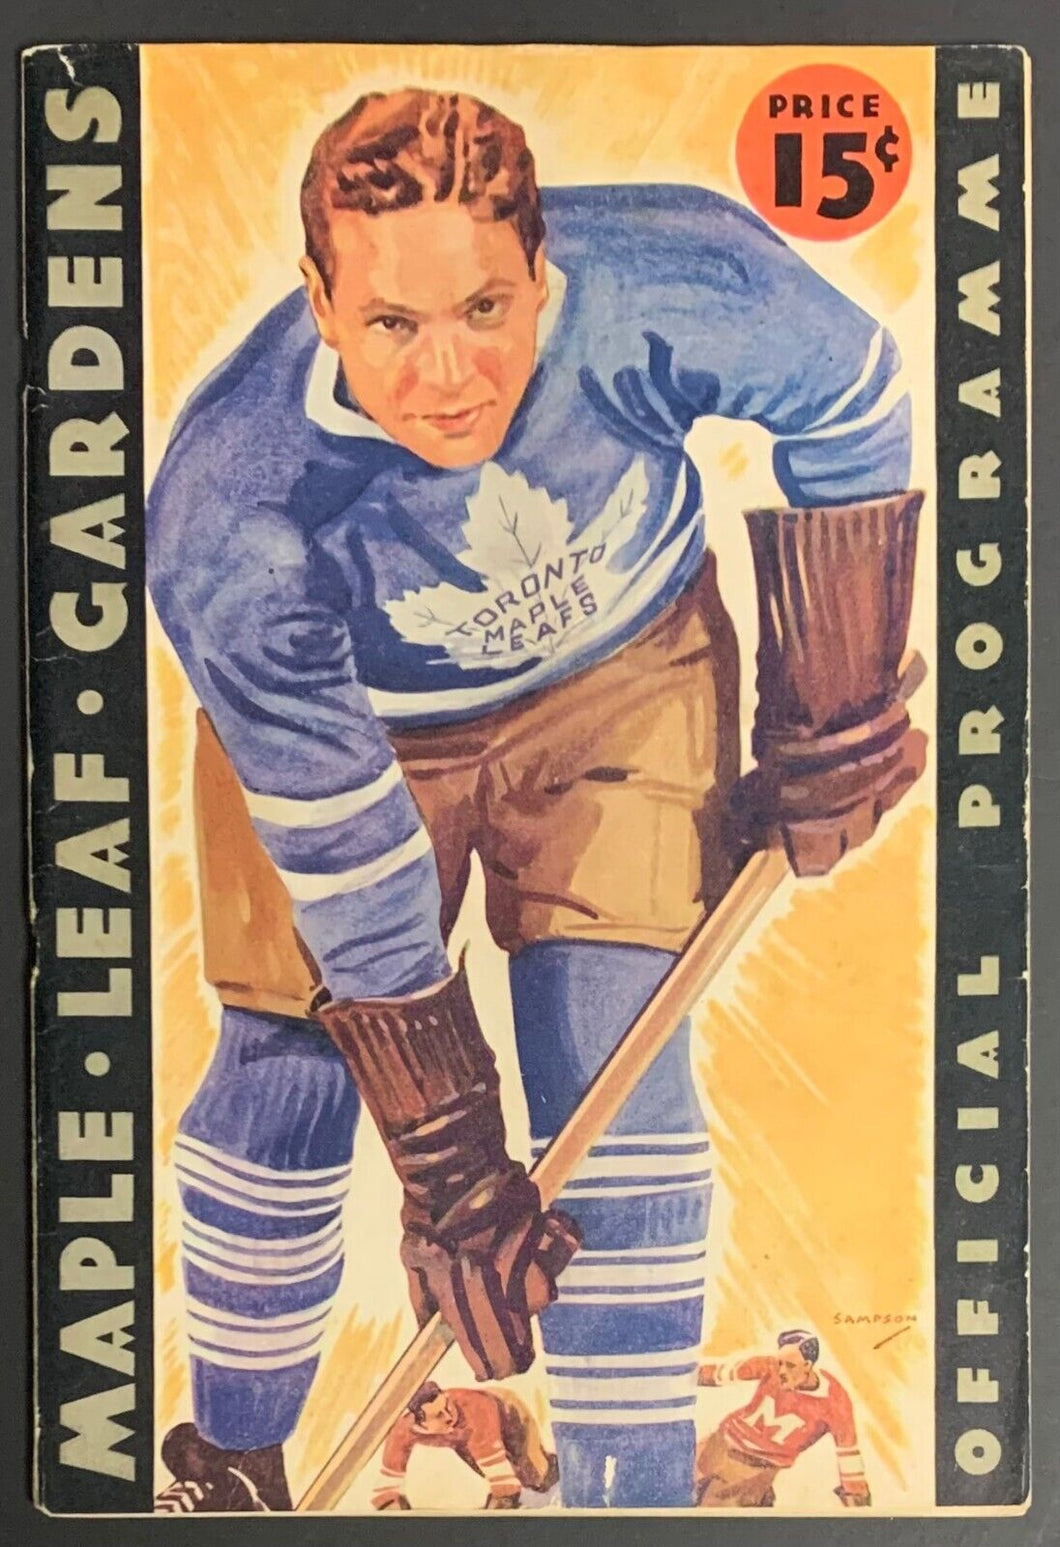 1936 Stanley Cup Finals NHL Hockey Program Game 3 Toronto Maple Leafs Red Wings